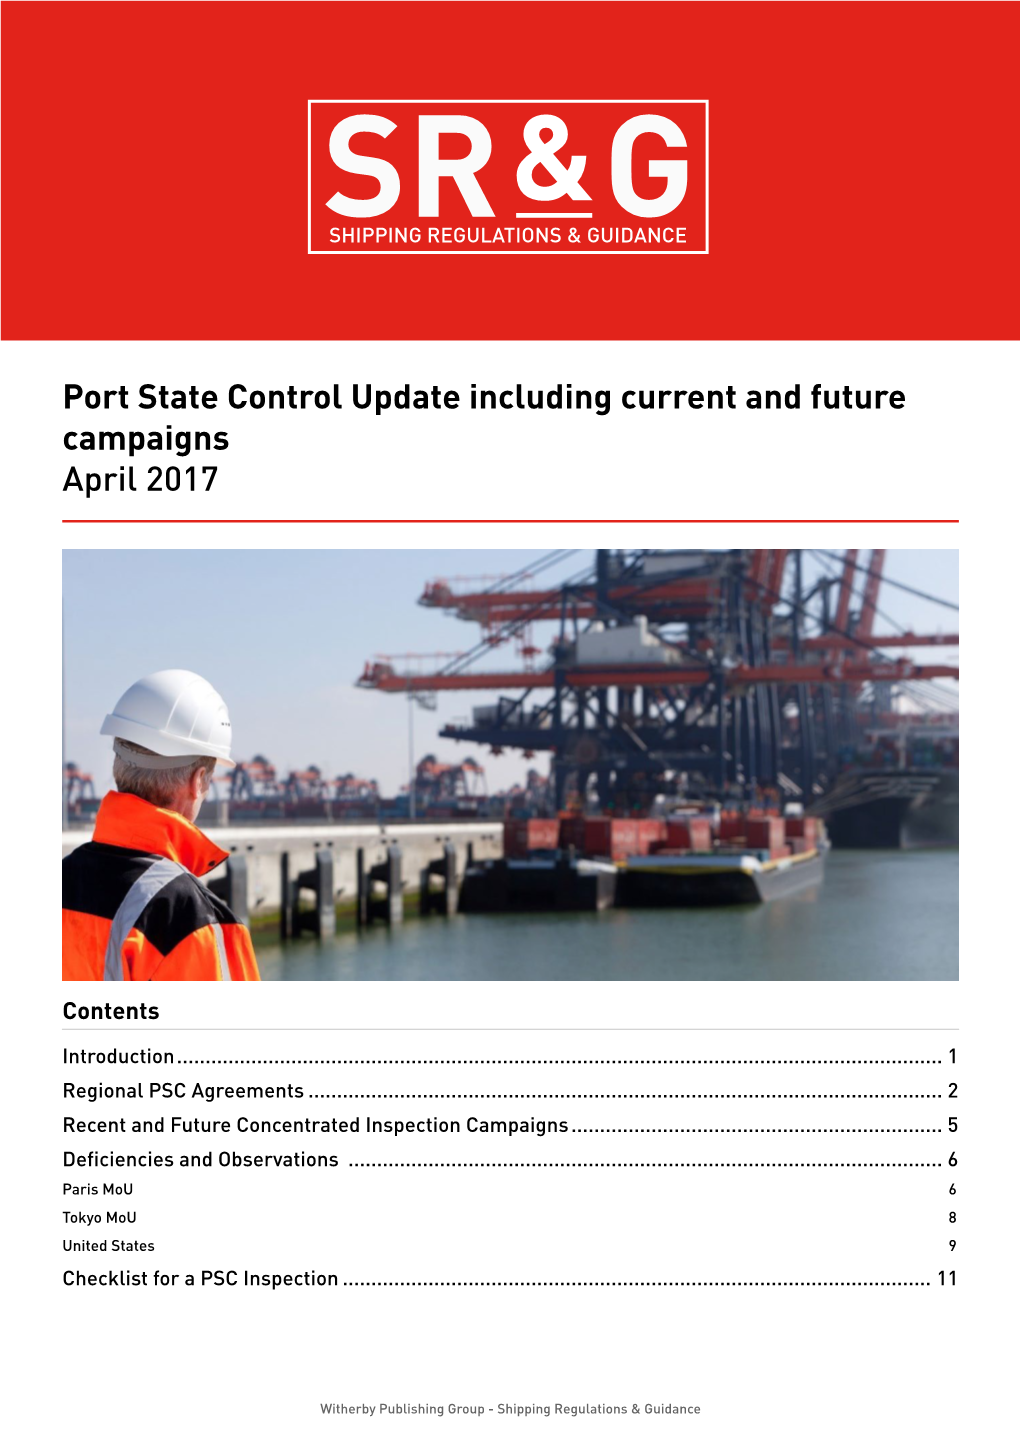 Port State Control Update Including Current and Future Campaigns April 2017